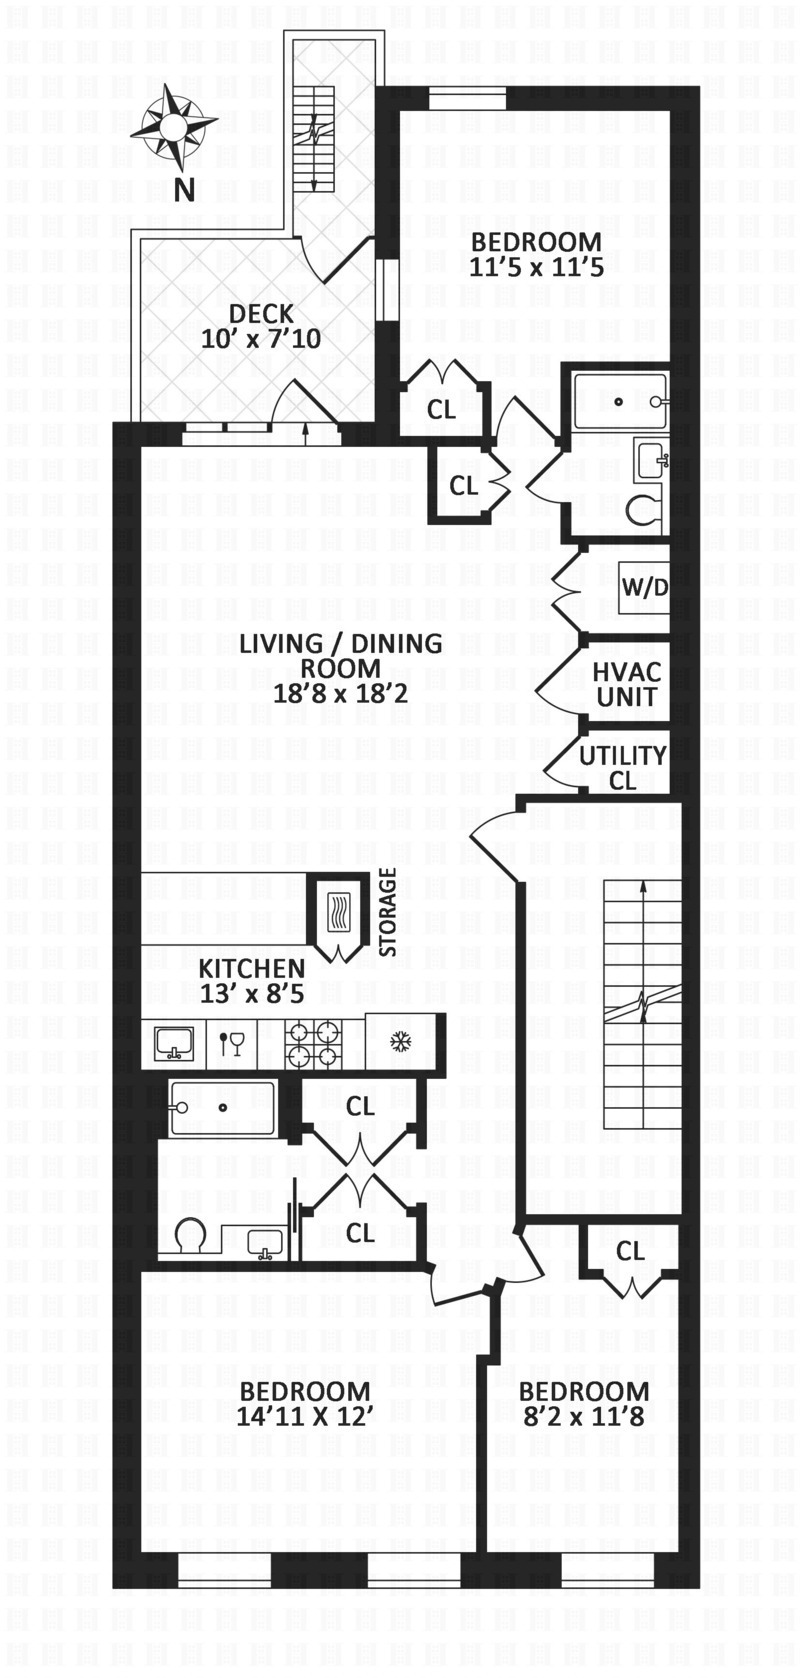 Floorplan for 132 2nd Place, 3